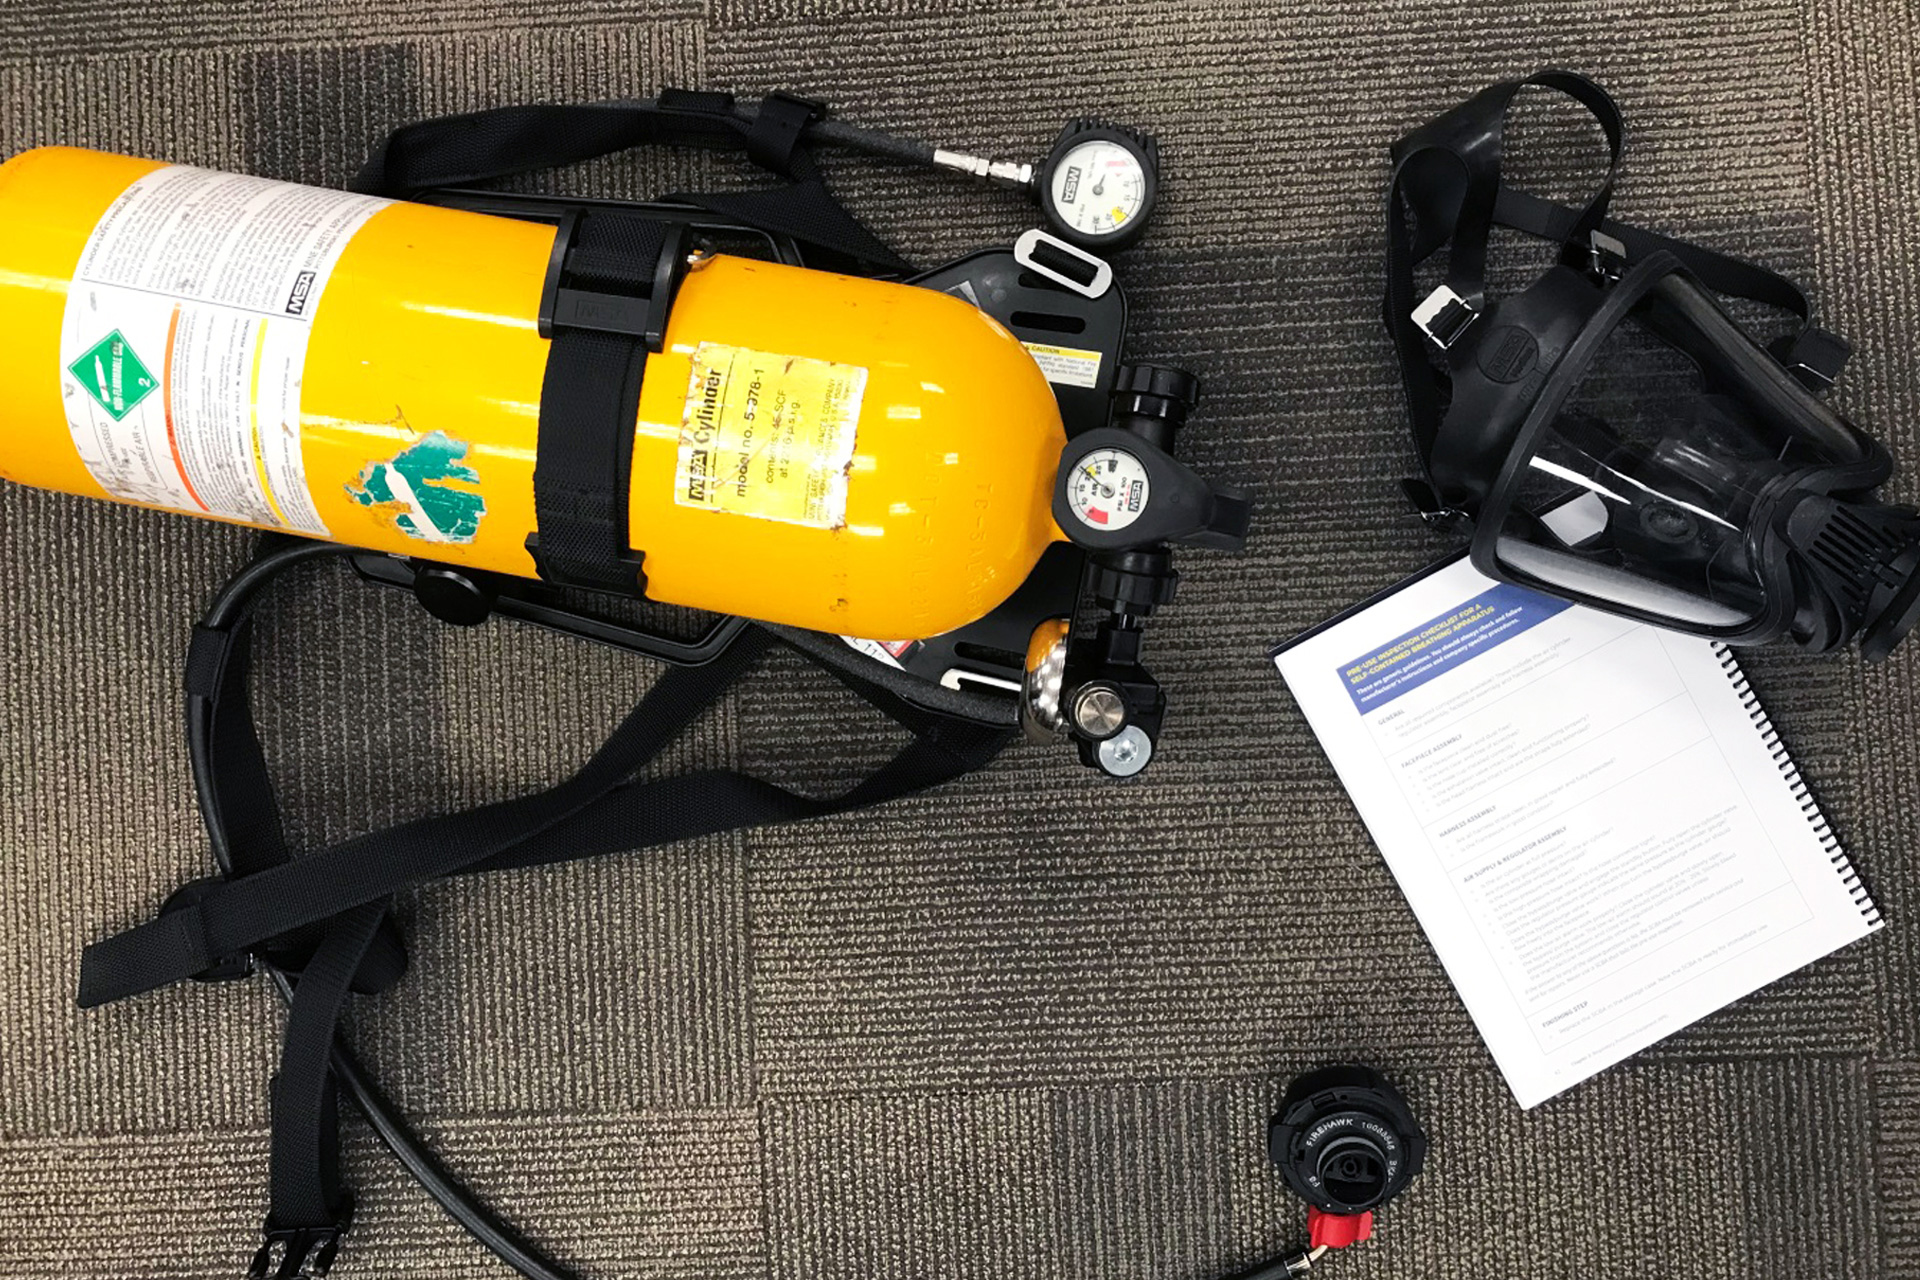 A Self-Contained Breathing Apparatus (SCBA) and a pre-use inspection checklist